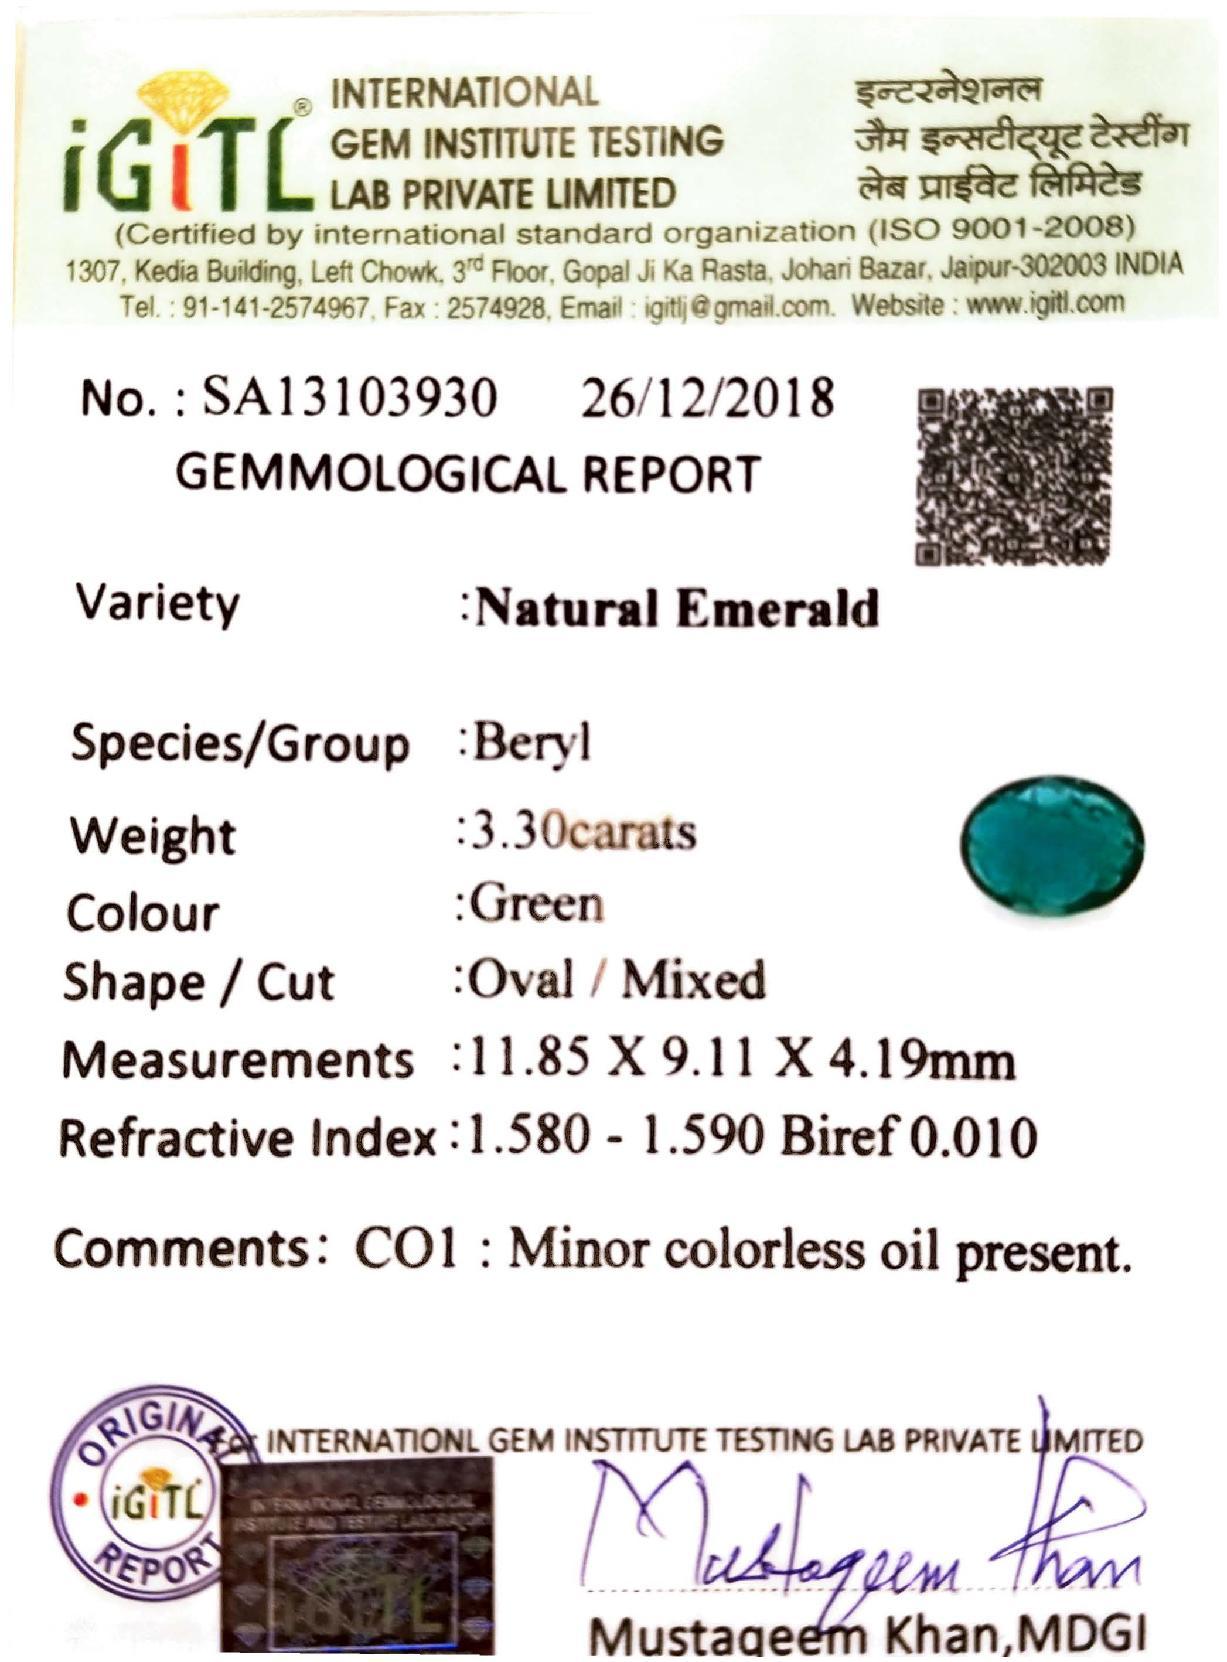 Oval Cut 3.3 Ct Weight Oval Shaped Green Color IGITL Certified Emerald Gemstone Pendant For Sale